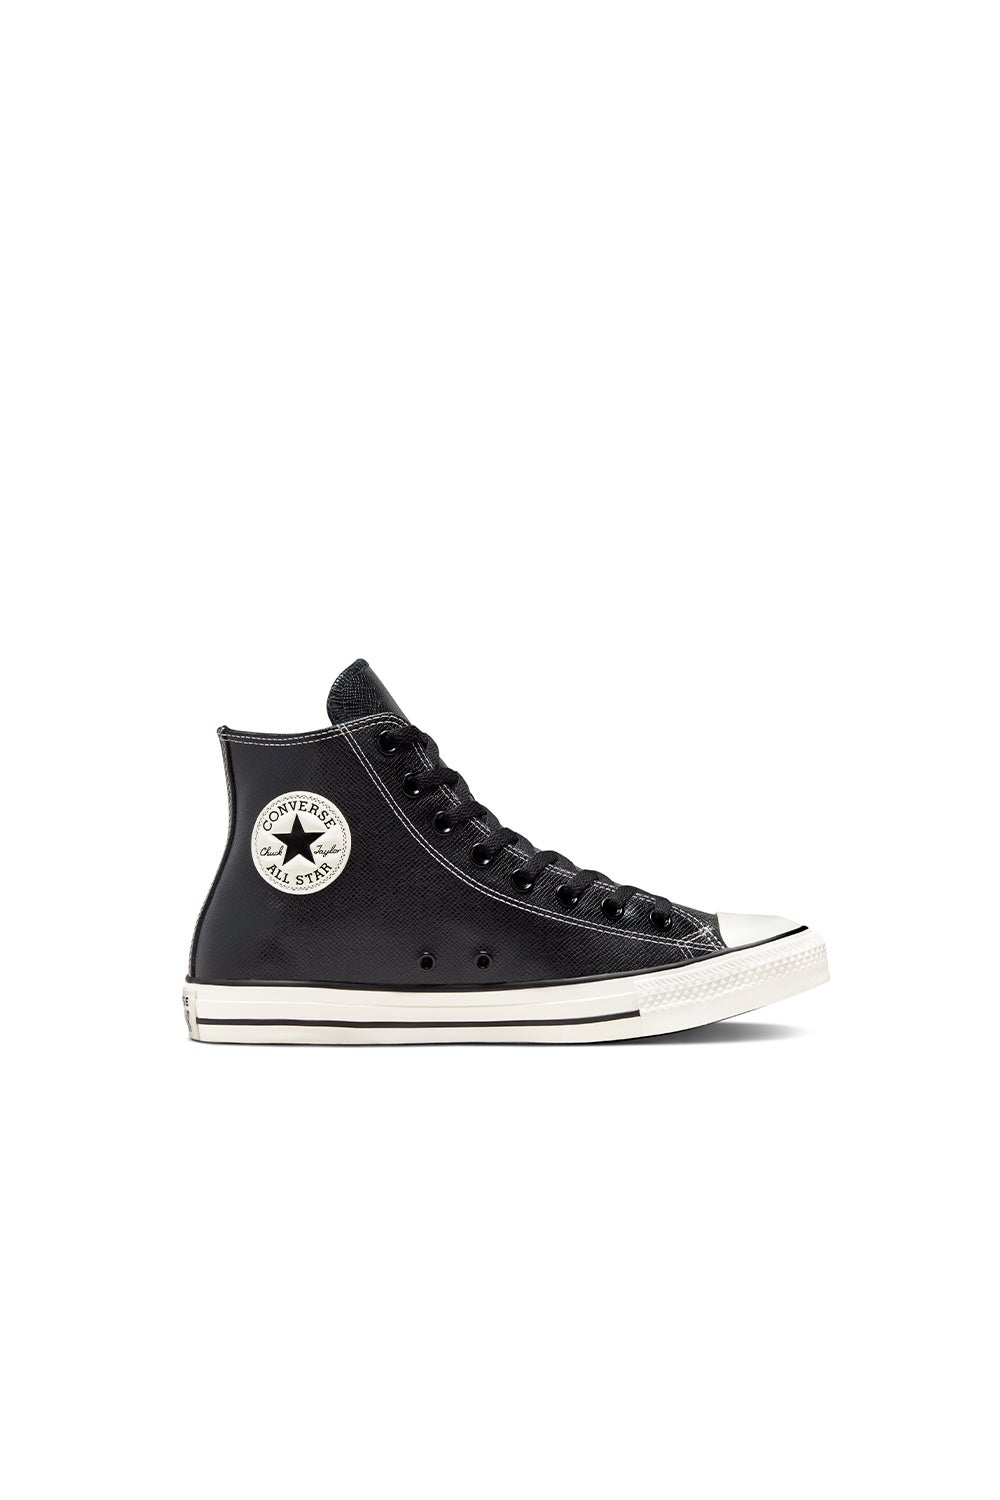 Converse Chuck Taylor All Star Embossed Leather High Top Black